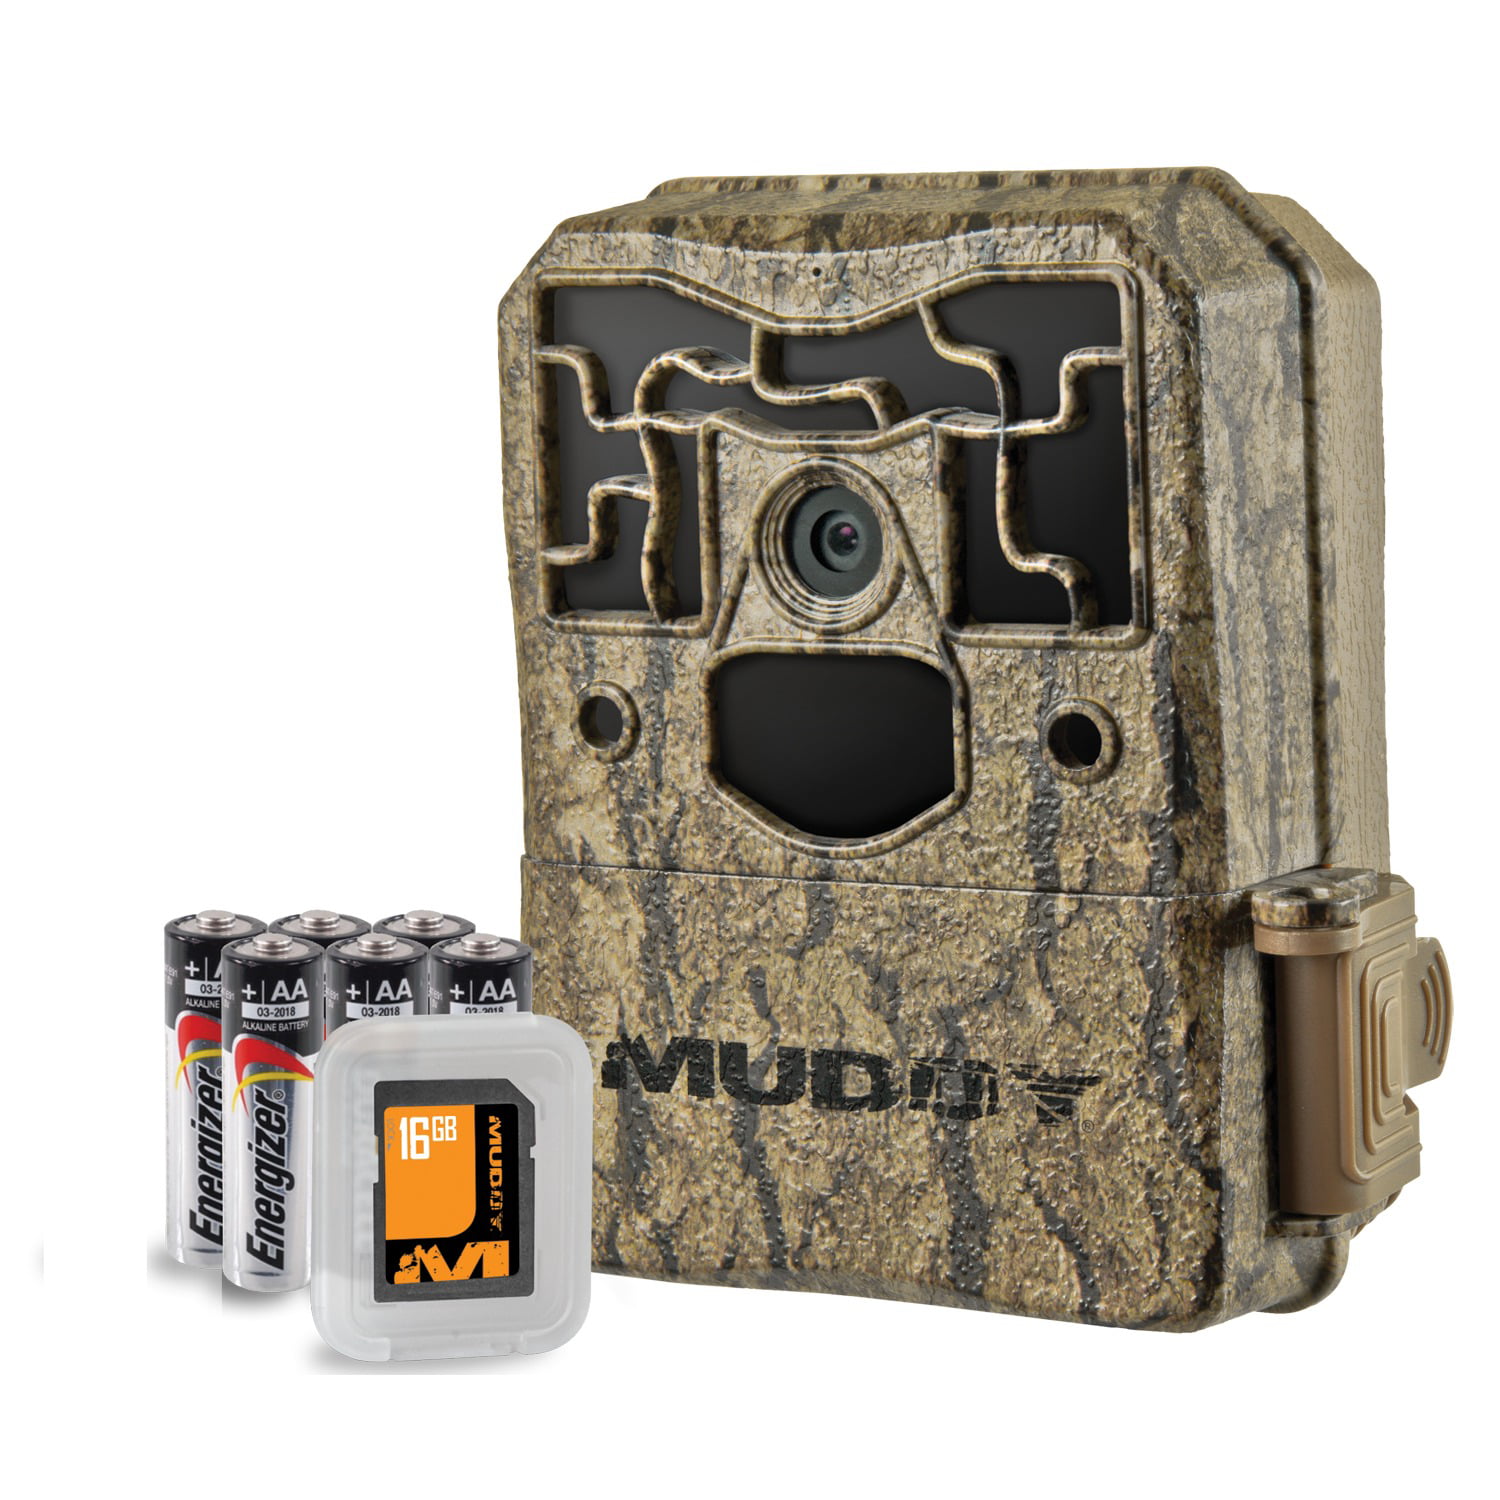 Muddy MTC600 20MP The Pro-Cam Trail Camera for sale online 